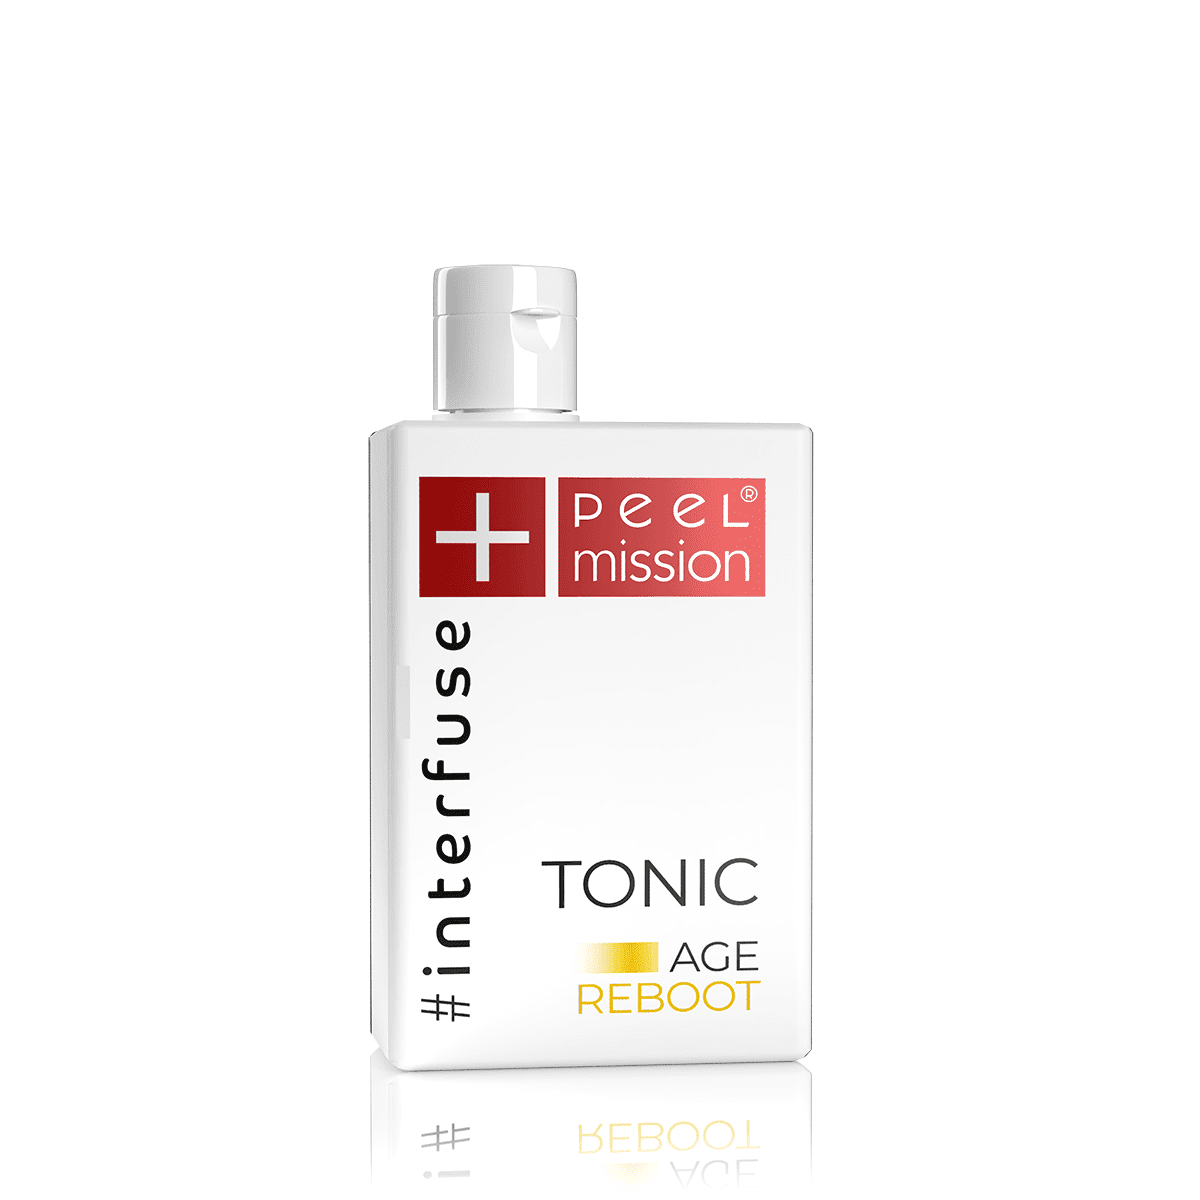 #interfuse AGE REBOOT TONIC